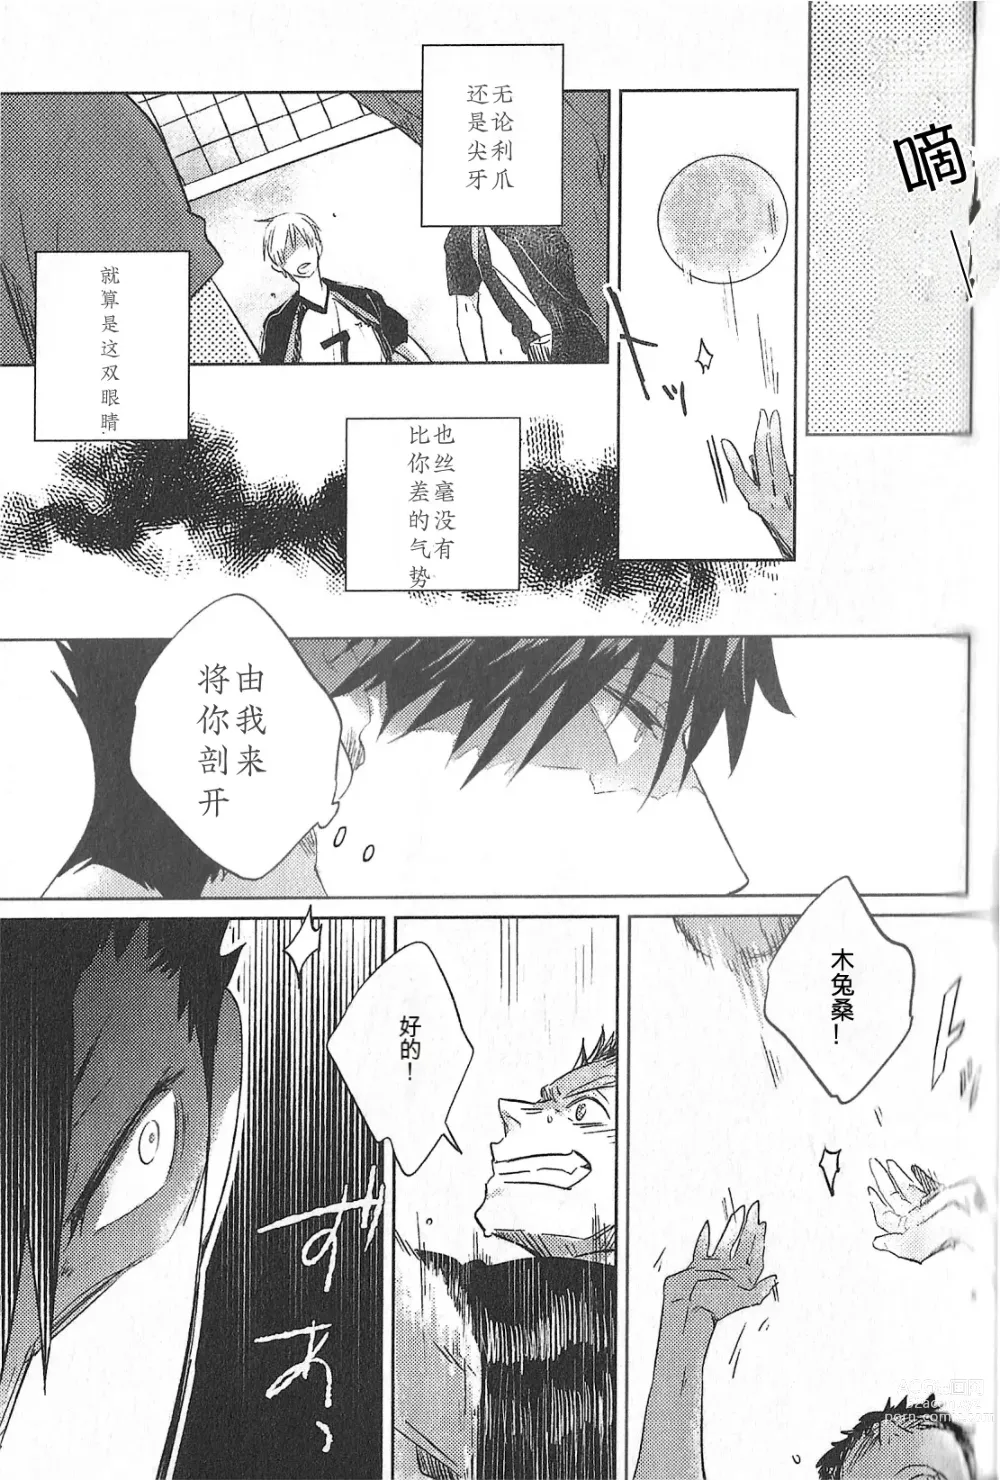 Page 24 of doujinshi 极境的野兽 后篇